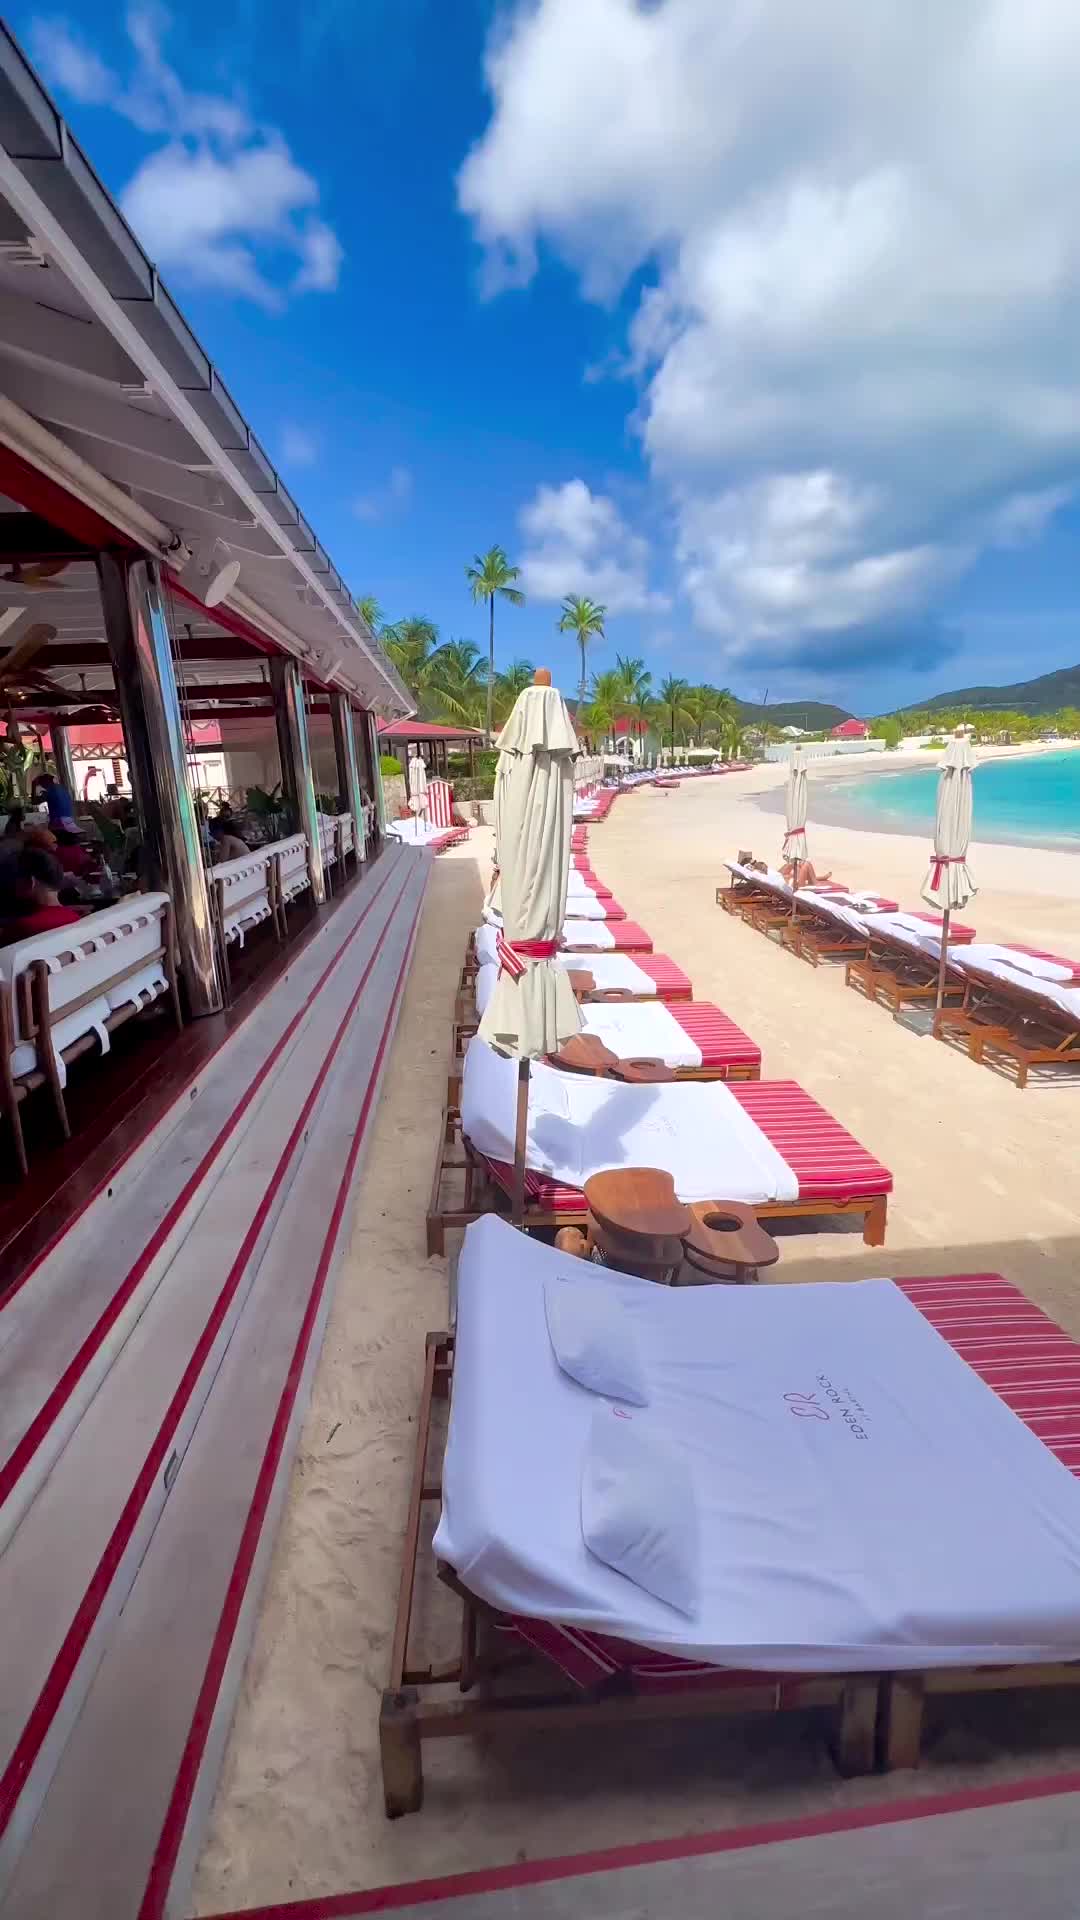 Discover Eden Rock - St Barths: The Most Magical Place